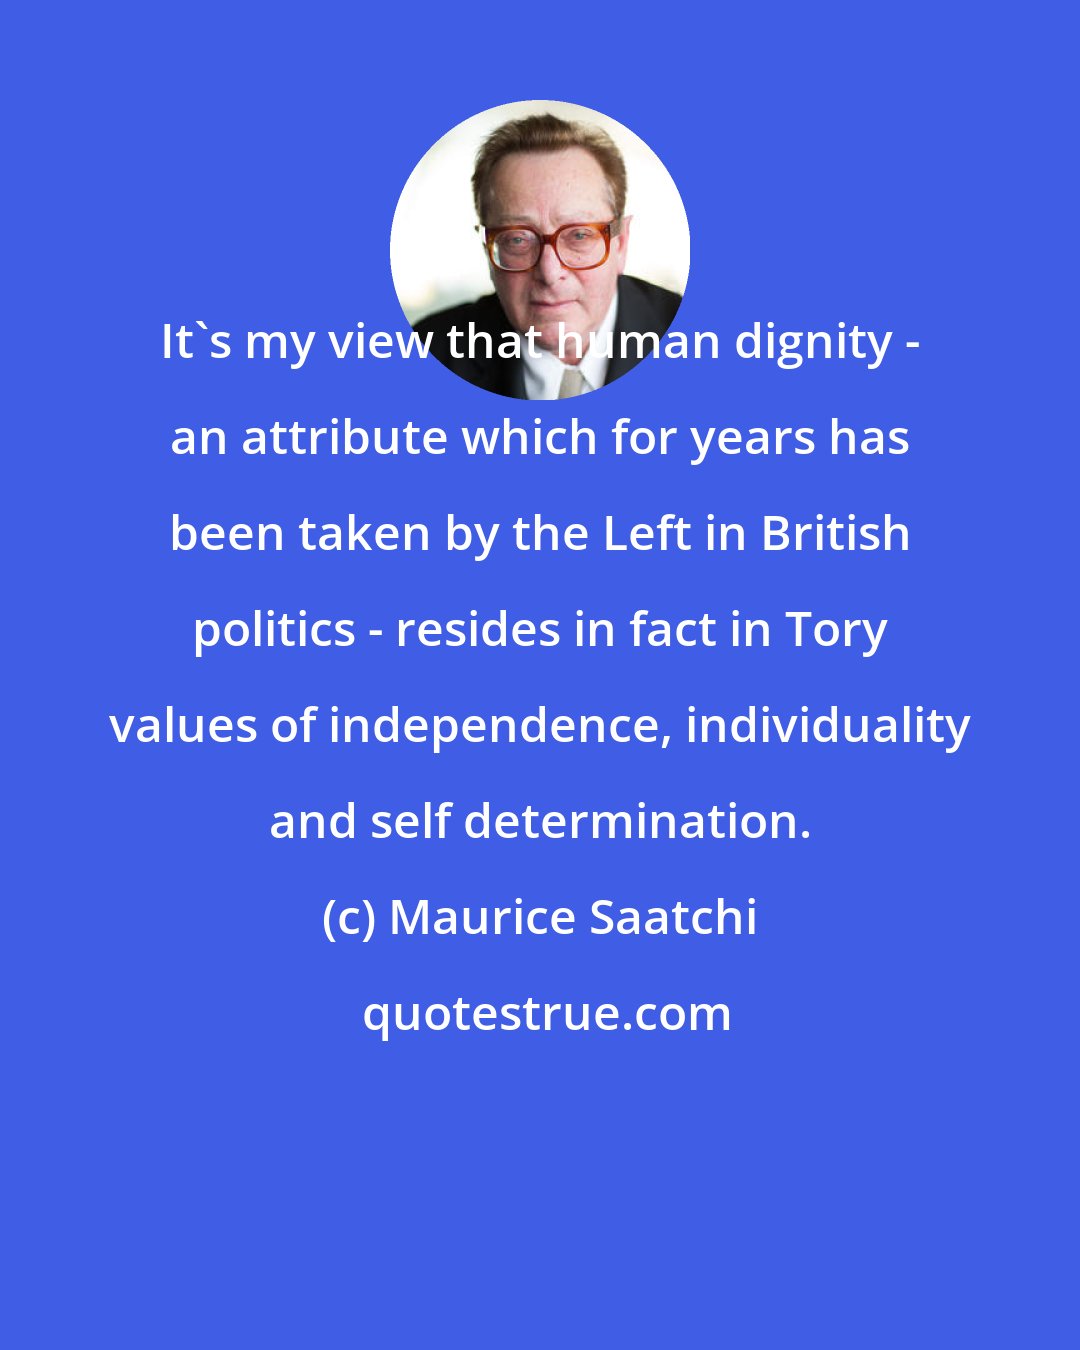 Maurice Saatchi: It's my view that human dignity - an attribute which for years has been taken by the Left in British politics - resides in fact in Tory values of independence, individuality and self determination.